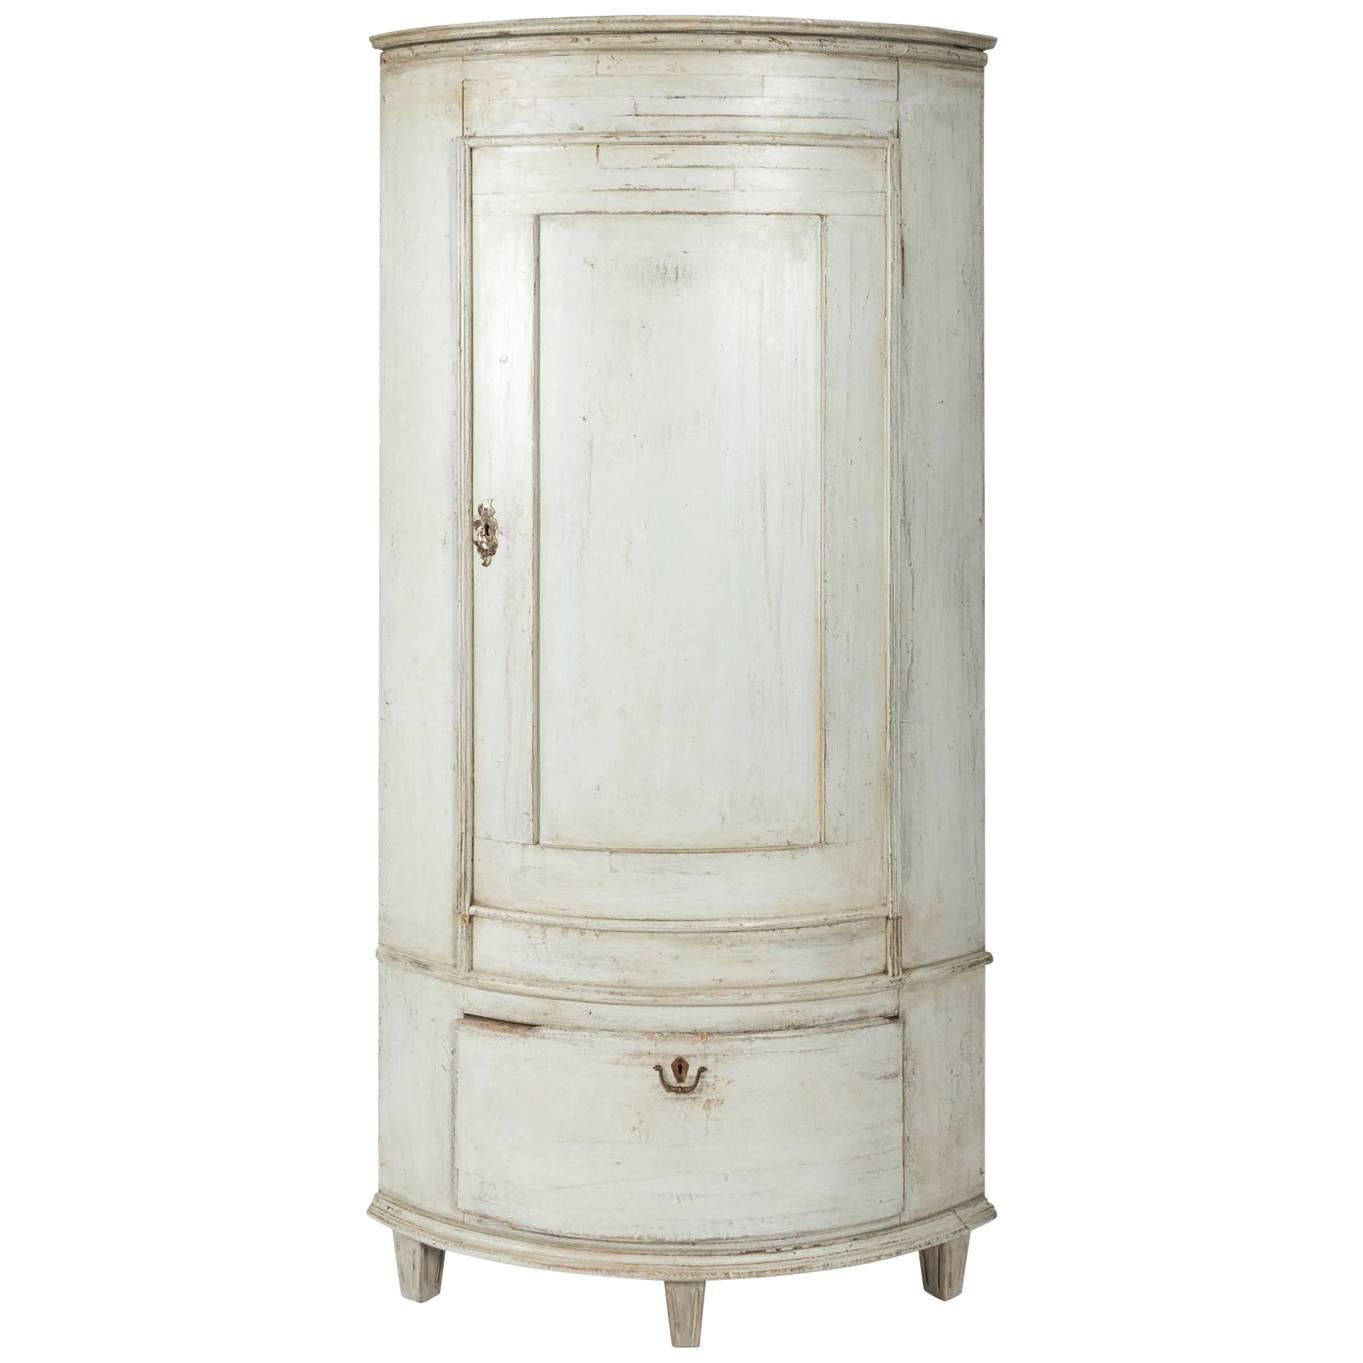 Early 19th Century Gustavian Corner Cabinet For Sale